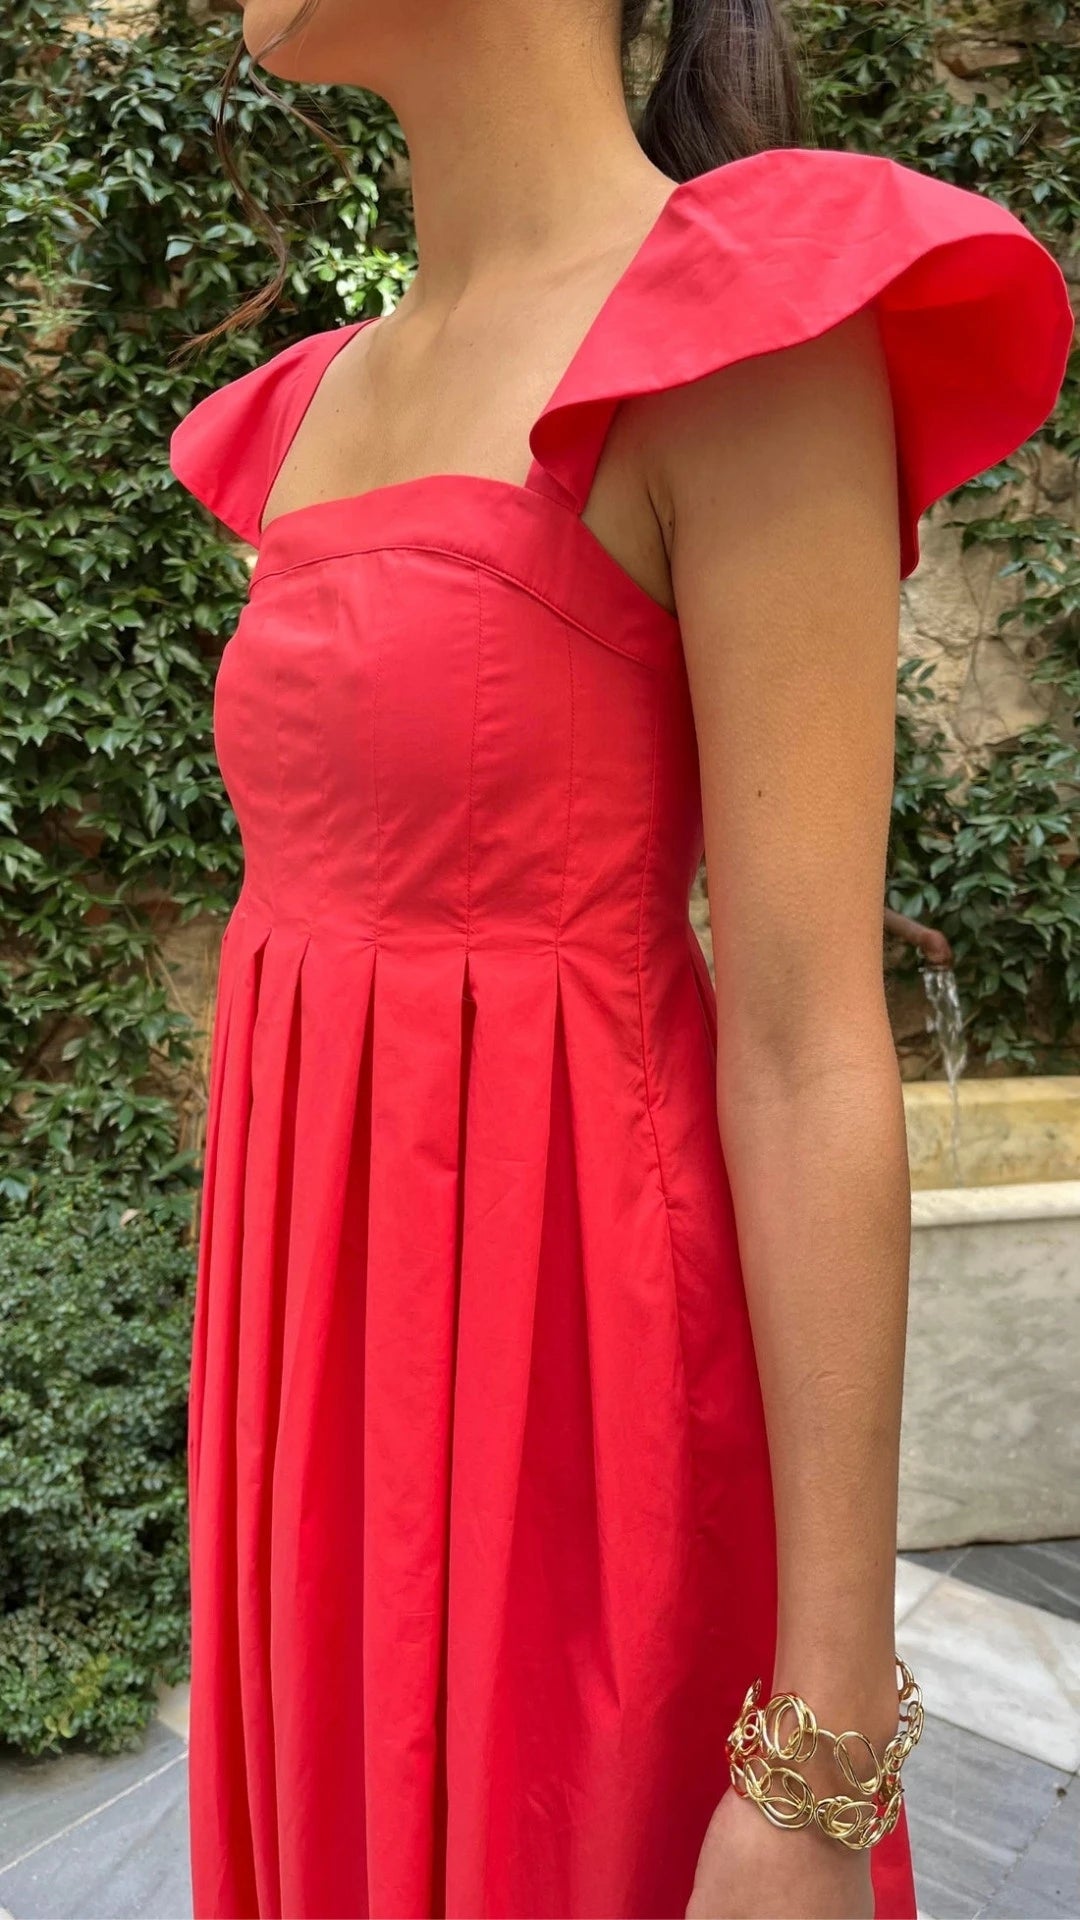 Rochas Paris Empire Waist Cotton Poplin Dress. Sweet with capped sleeves and a square neckline. The fitted body gives way to an a-line skirt. Red cotton poplin summer style. Shown on the model with detail to the cap sleeve.